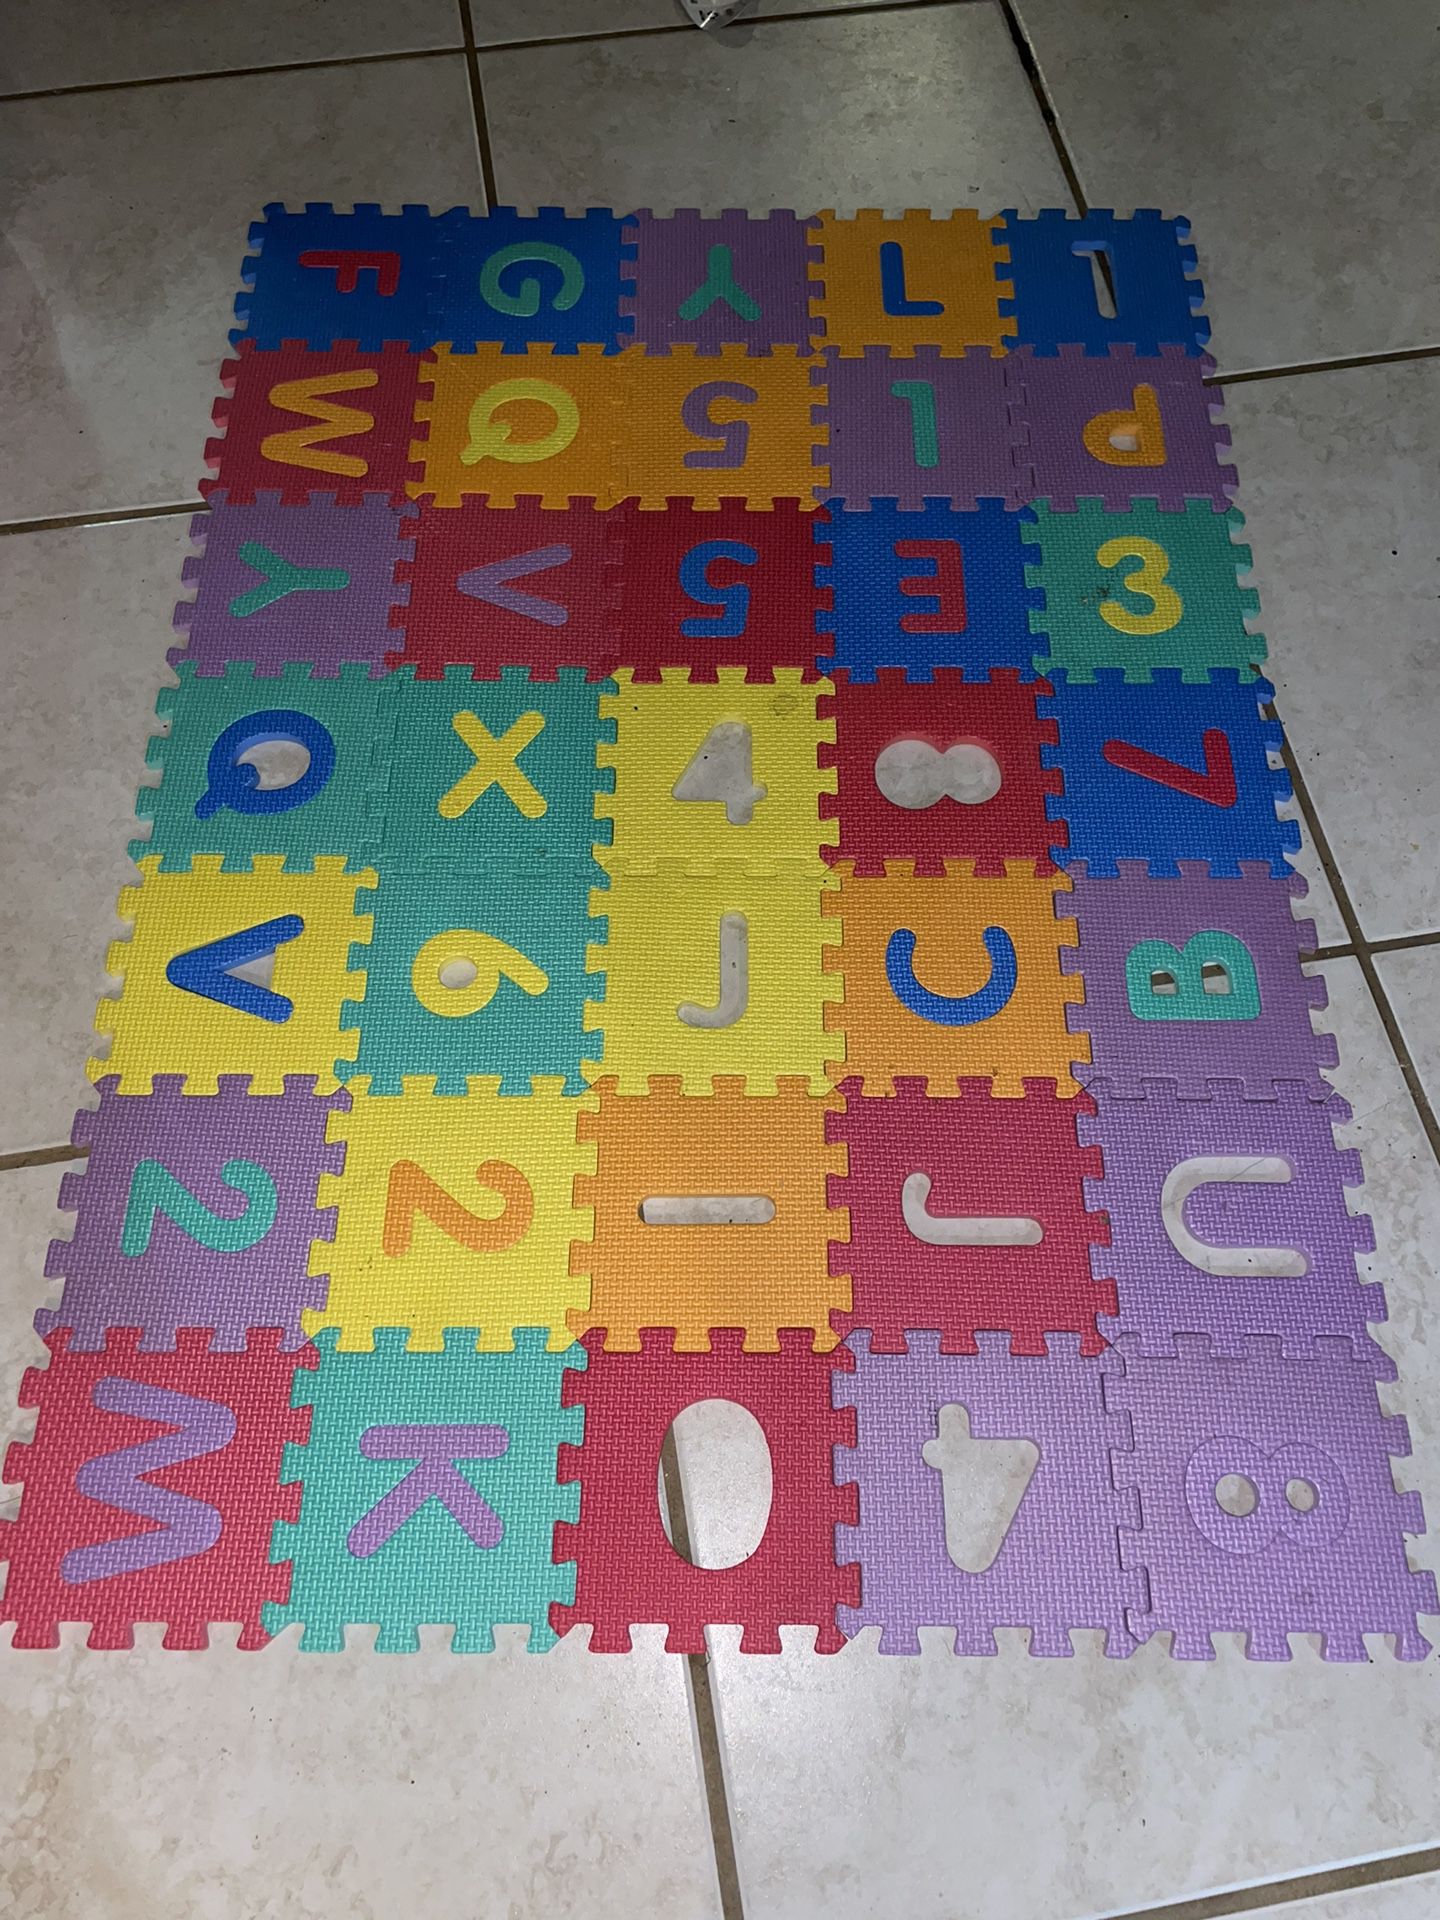 Alphabet And Number Foam Tiles 